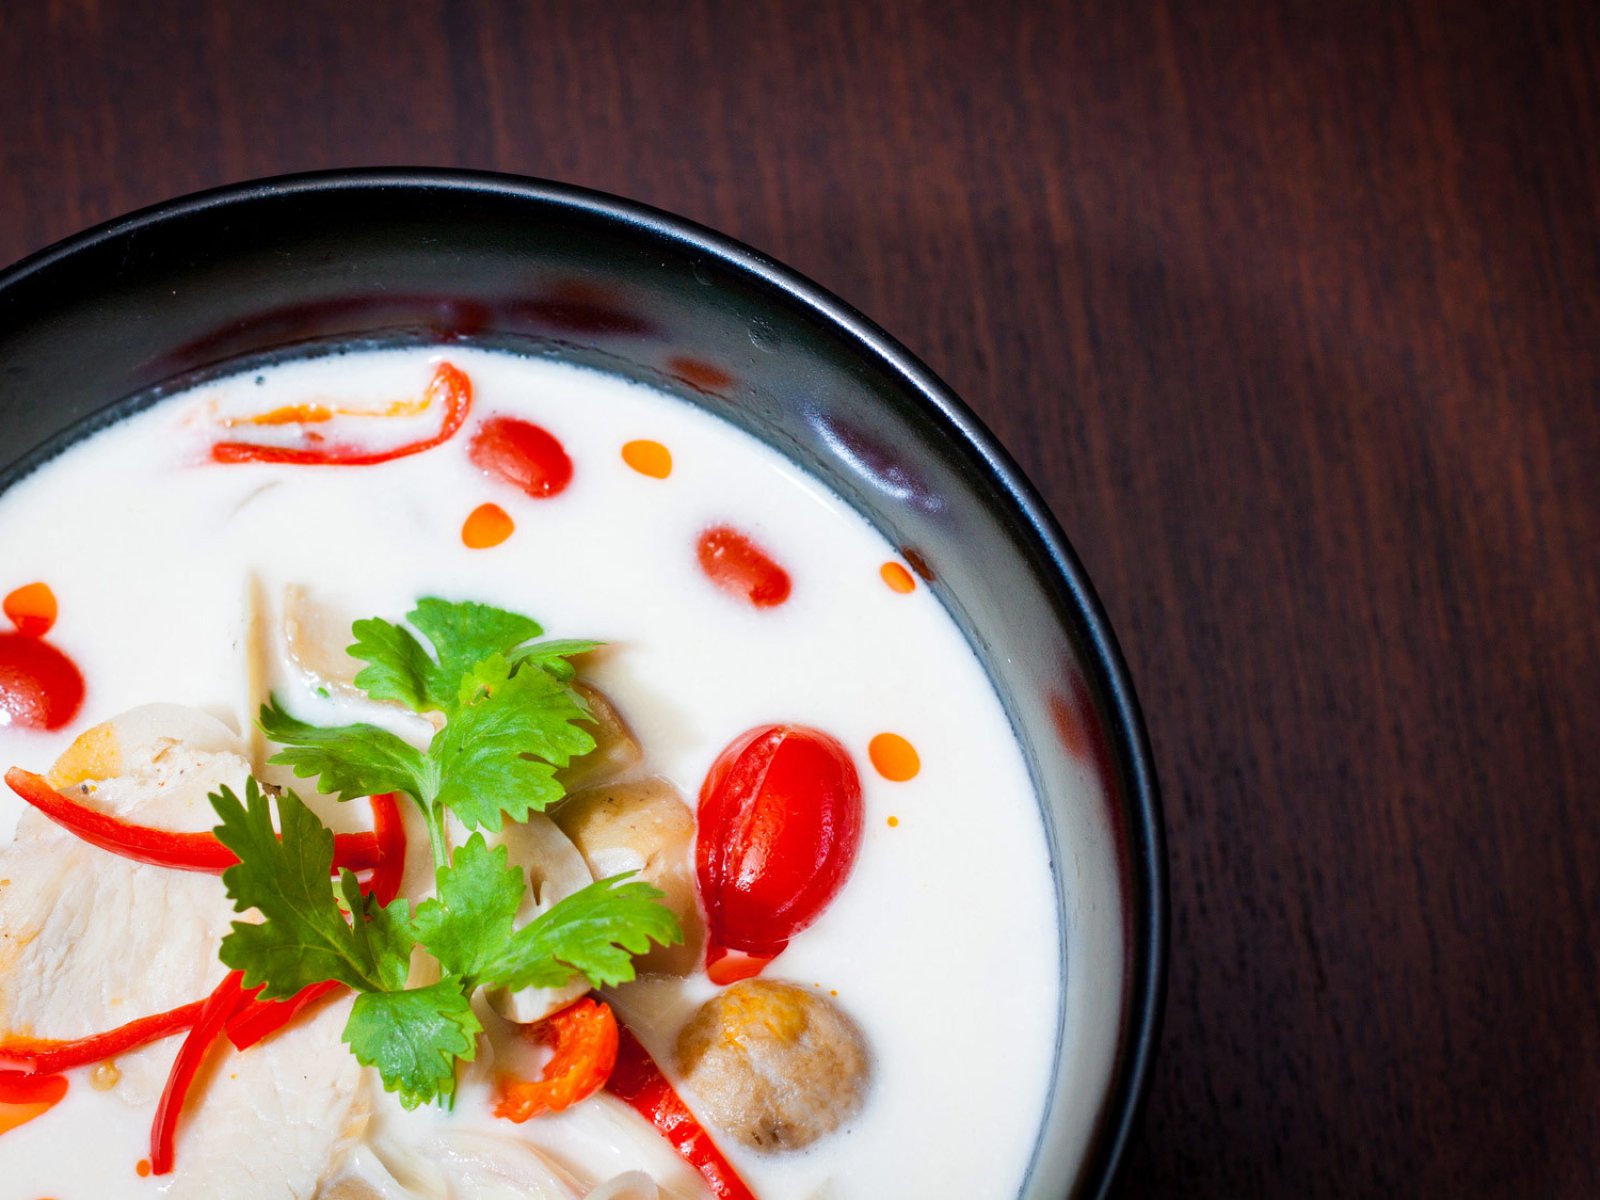 How to try Tom Kha soup in Bangkok